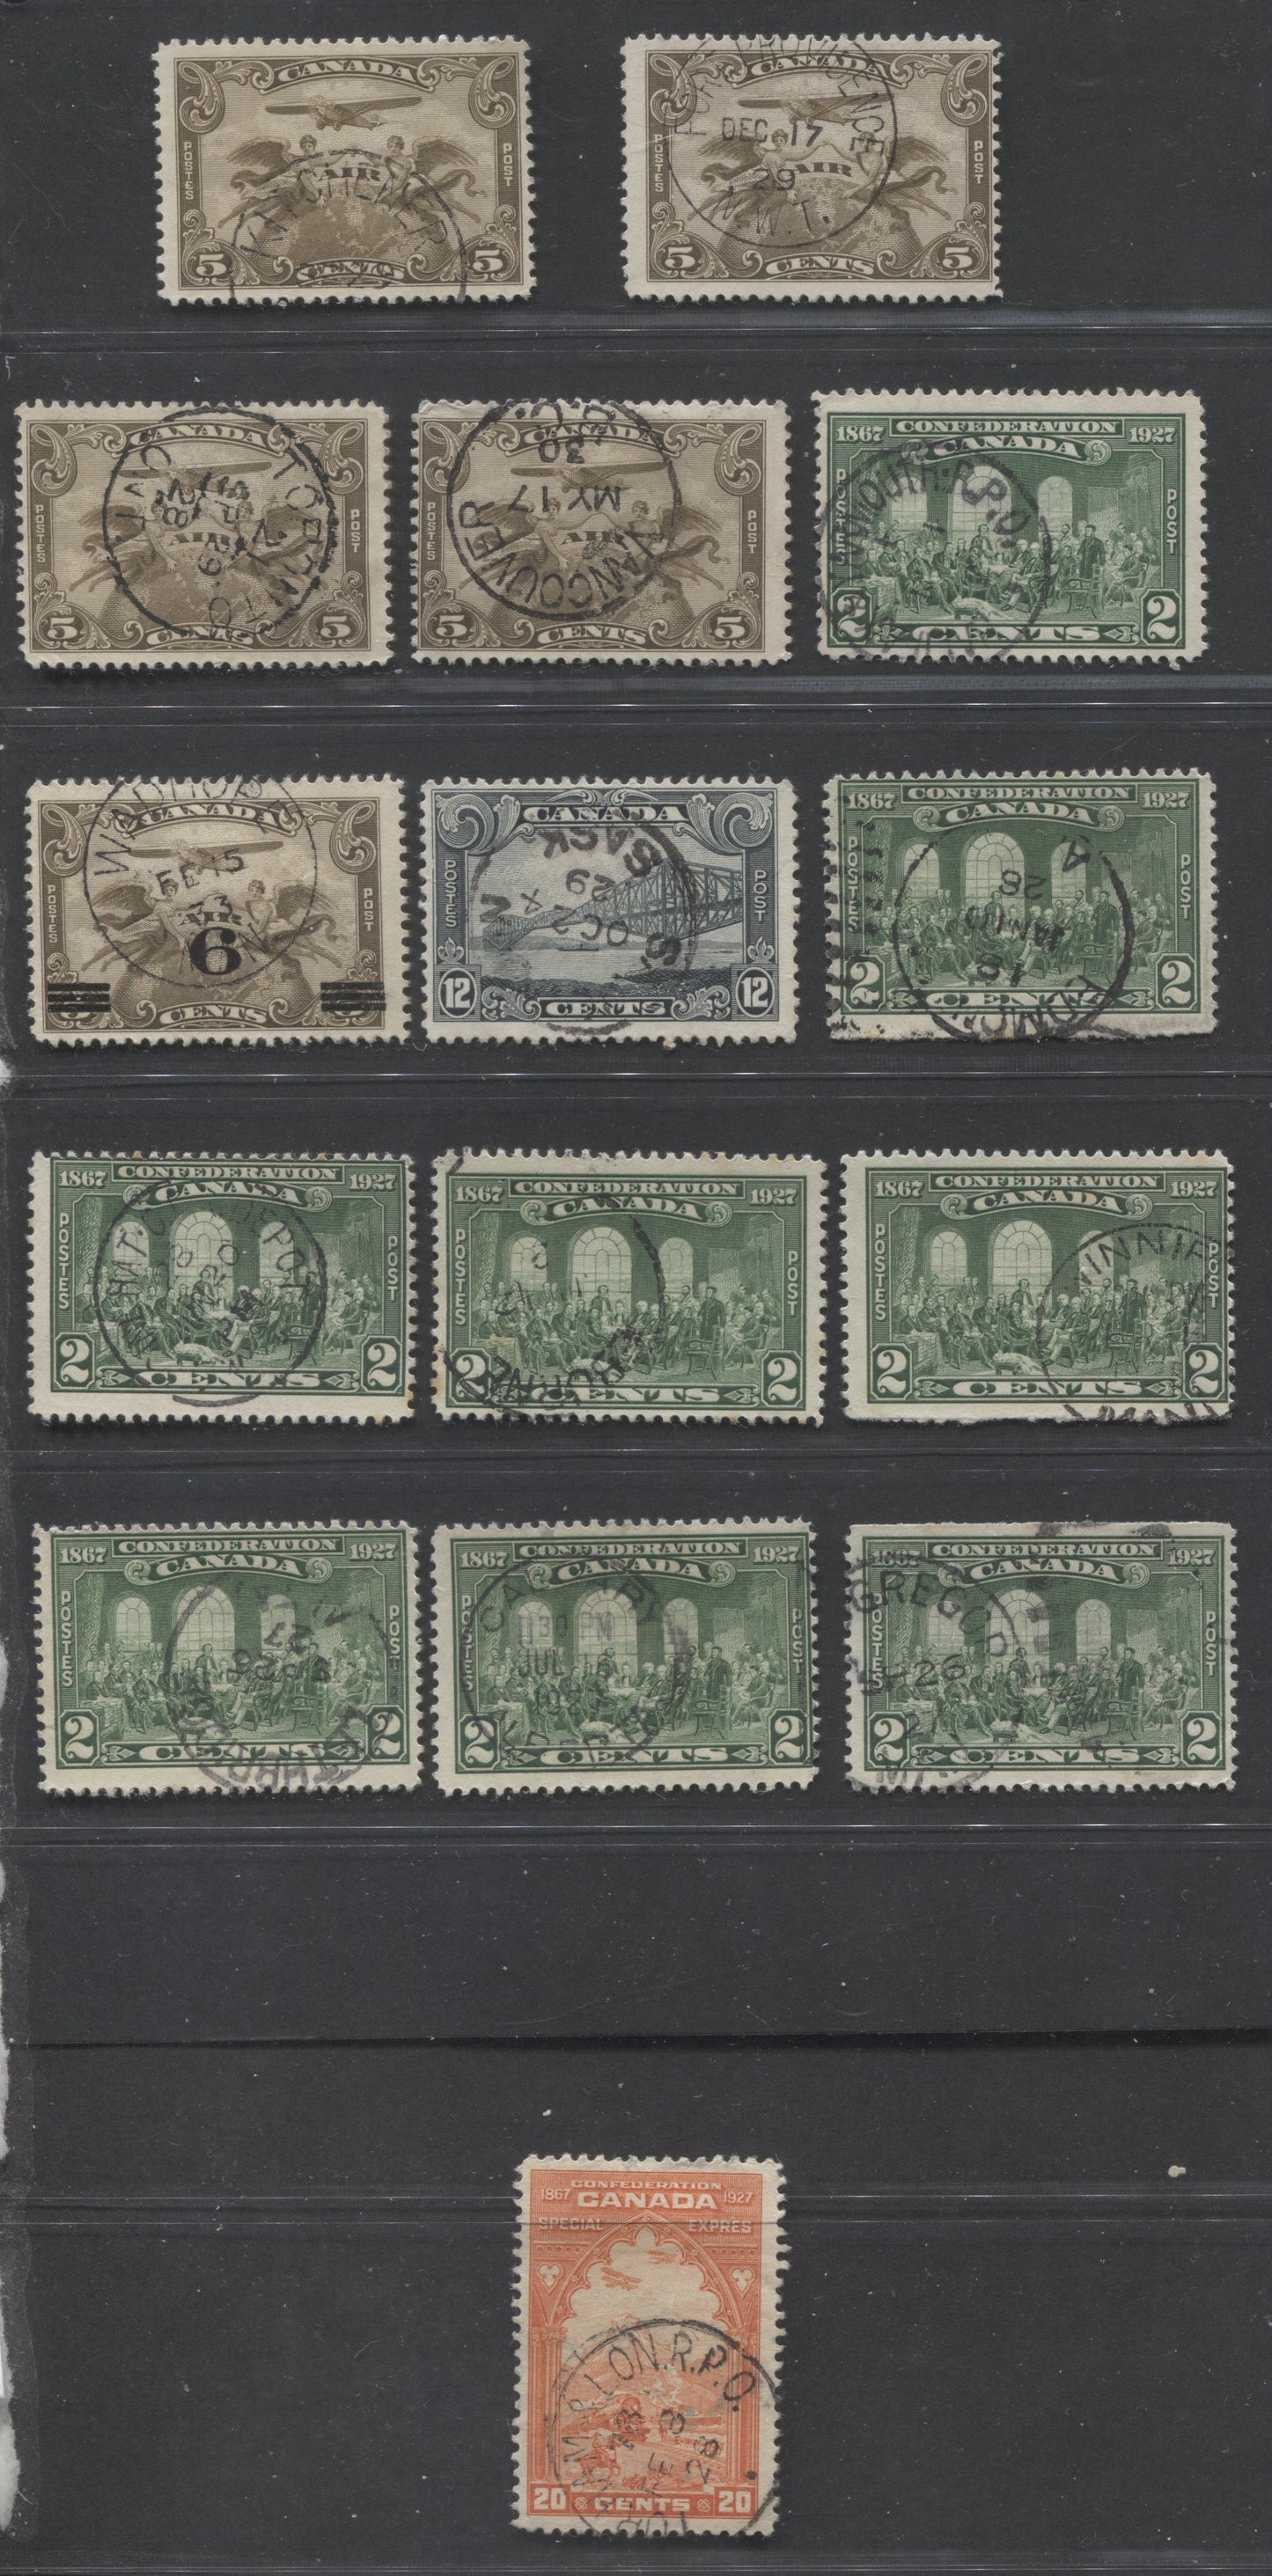 Lot 294 Canada #142, C1, C3, E3, 156 2c, 5c, 6c on 5c, 12c, 20c Green - Orange Red Various Subjects, 1927-1929 Confederation & Scroll Issues, 15 Fine Used Singles, With Full, In-Period Dated CDS Town Cancellations